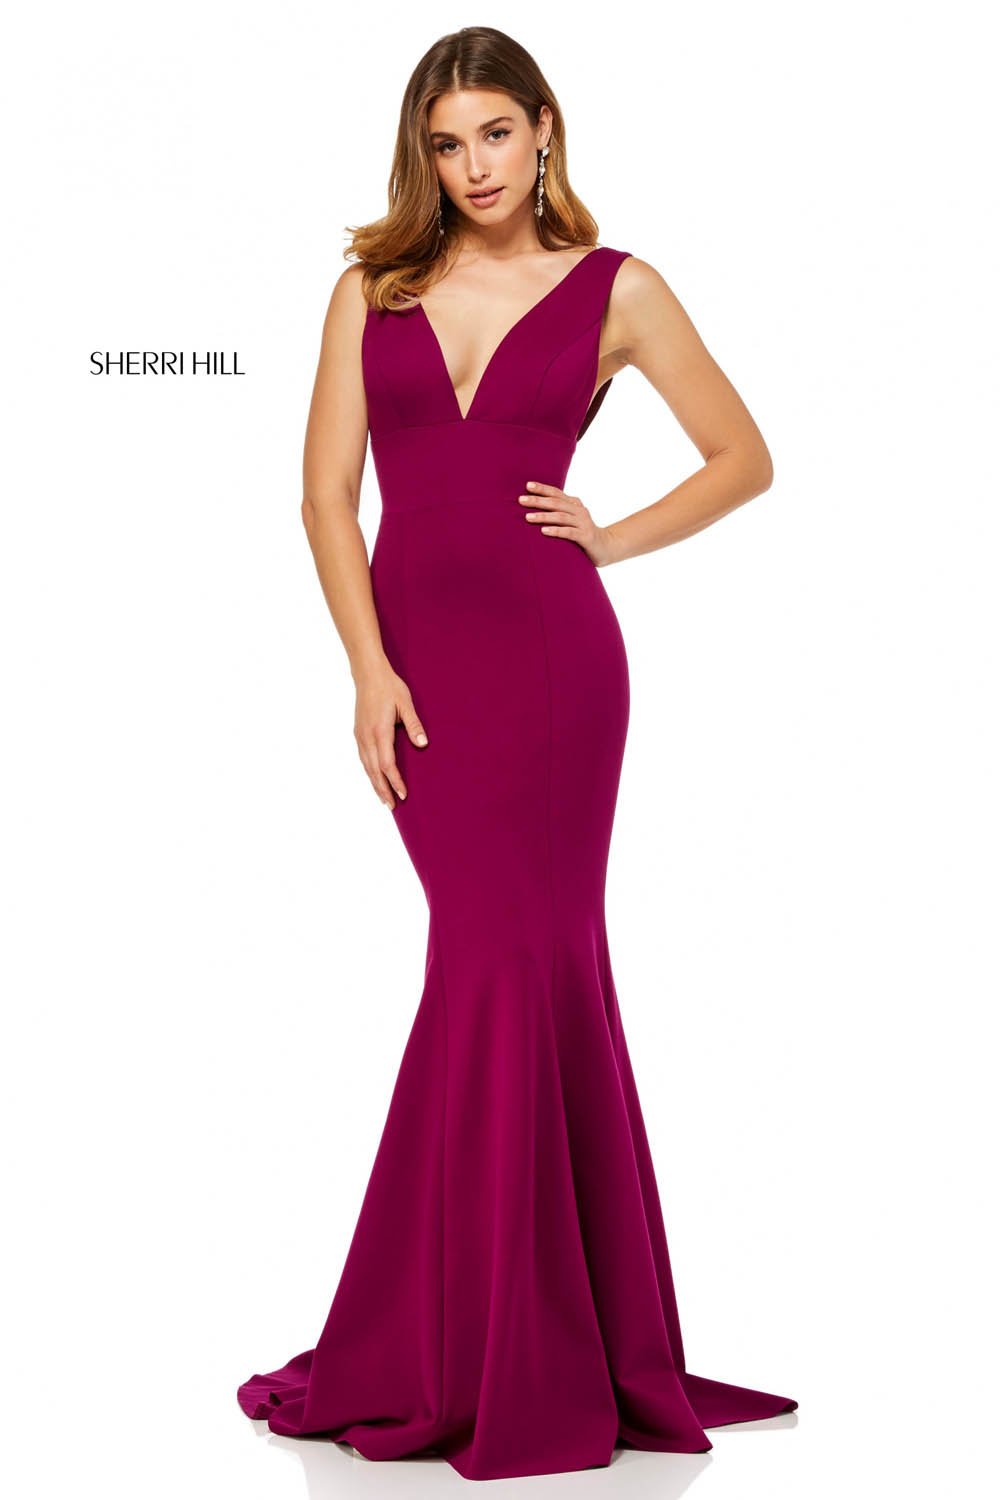 Sherri Hill 52483 dress images in these colors: Plum, Ivory, Royal, Black, Red, Navy.